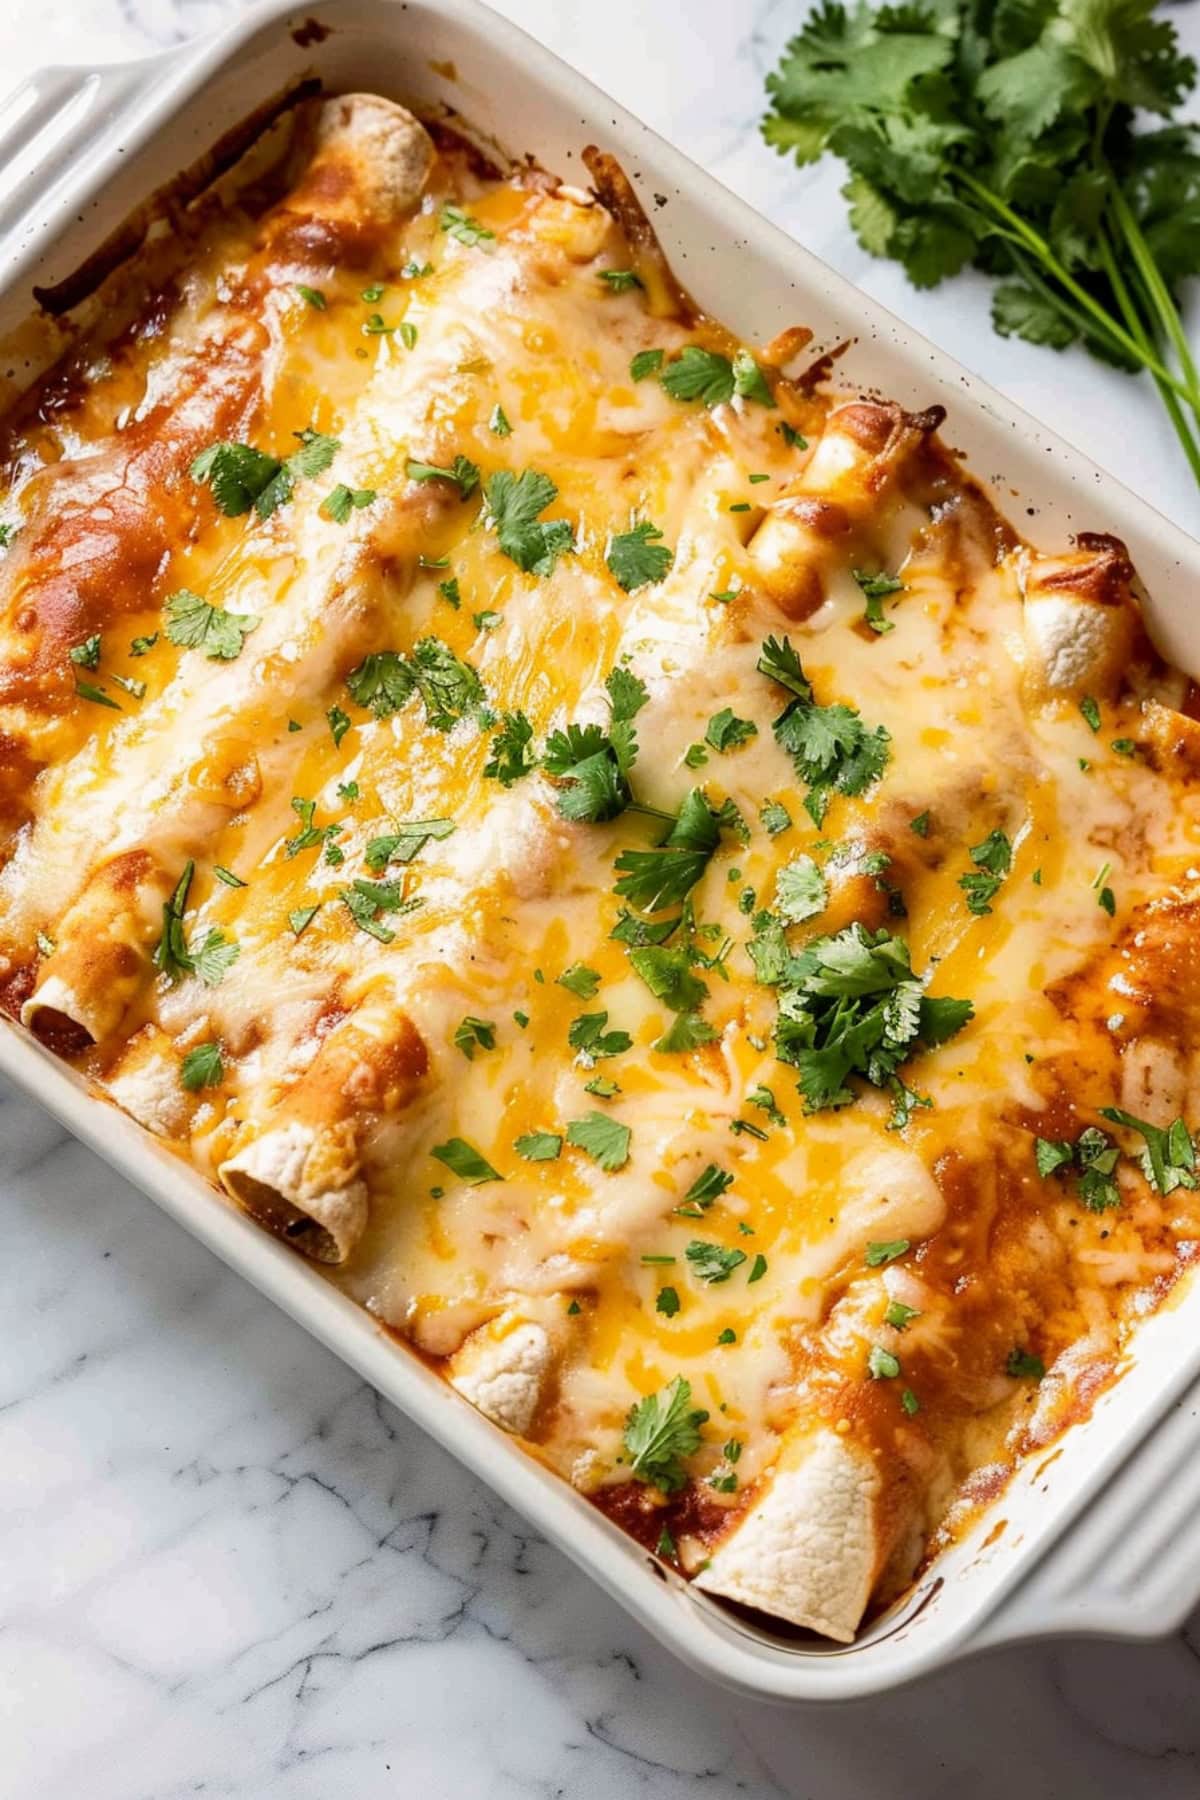 Cheesy chicken enchiladas with melted cheese and sauce.